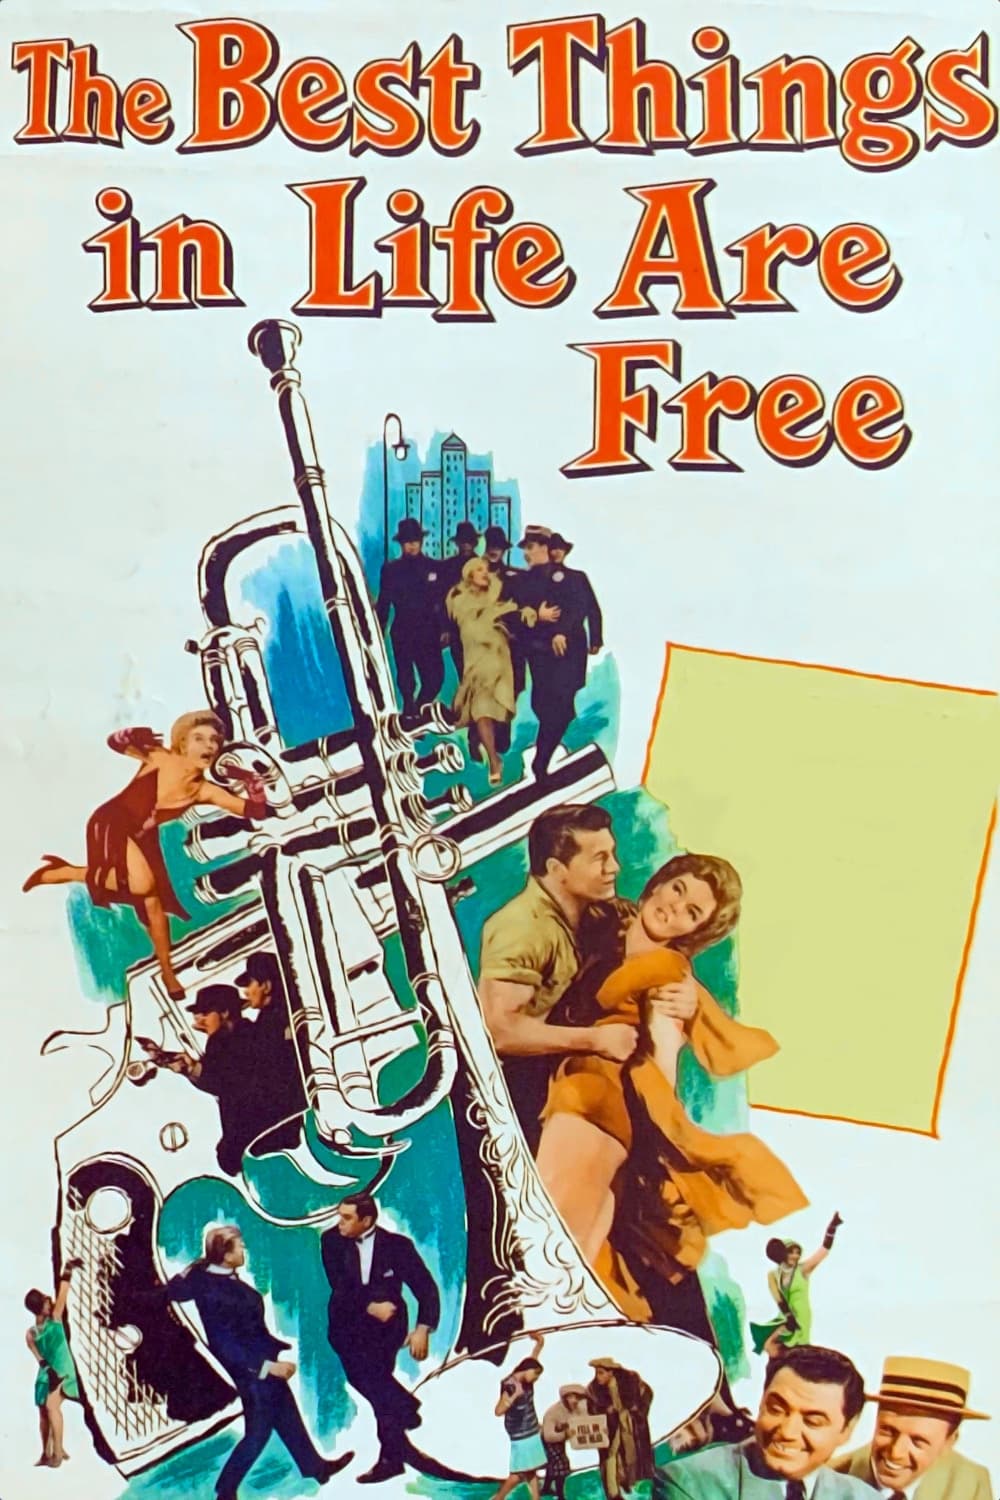 The Best Things in Life Are Free (1956)